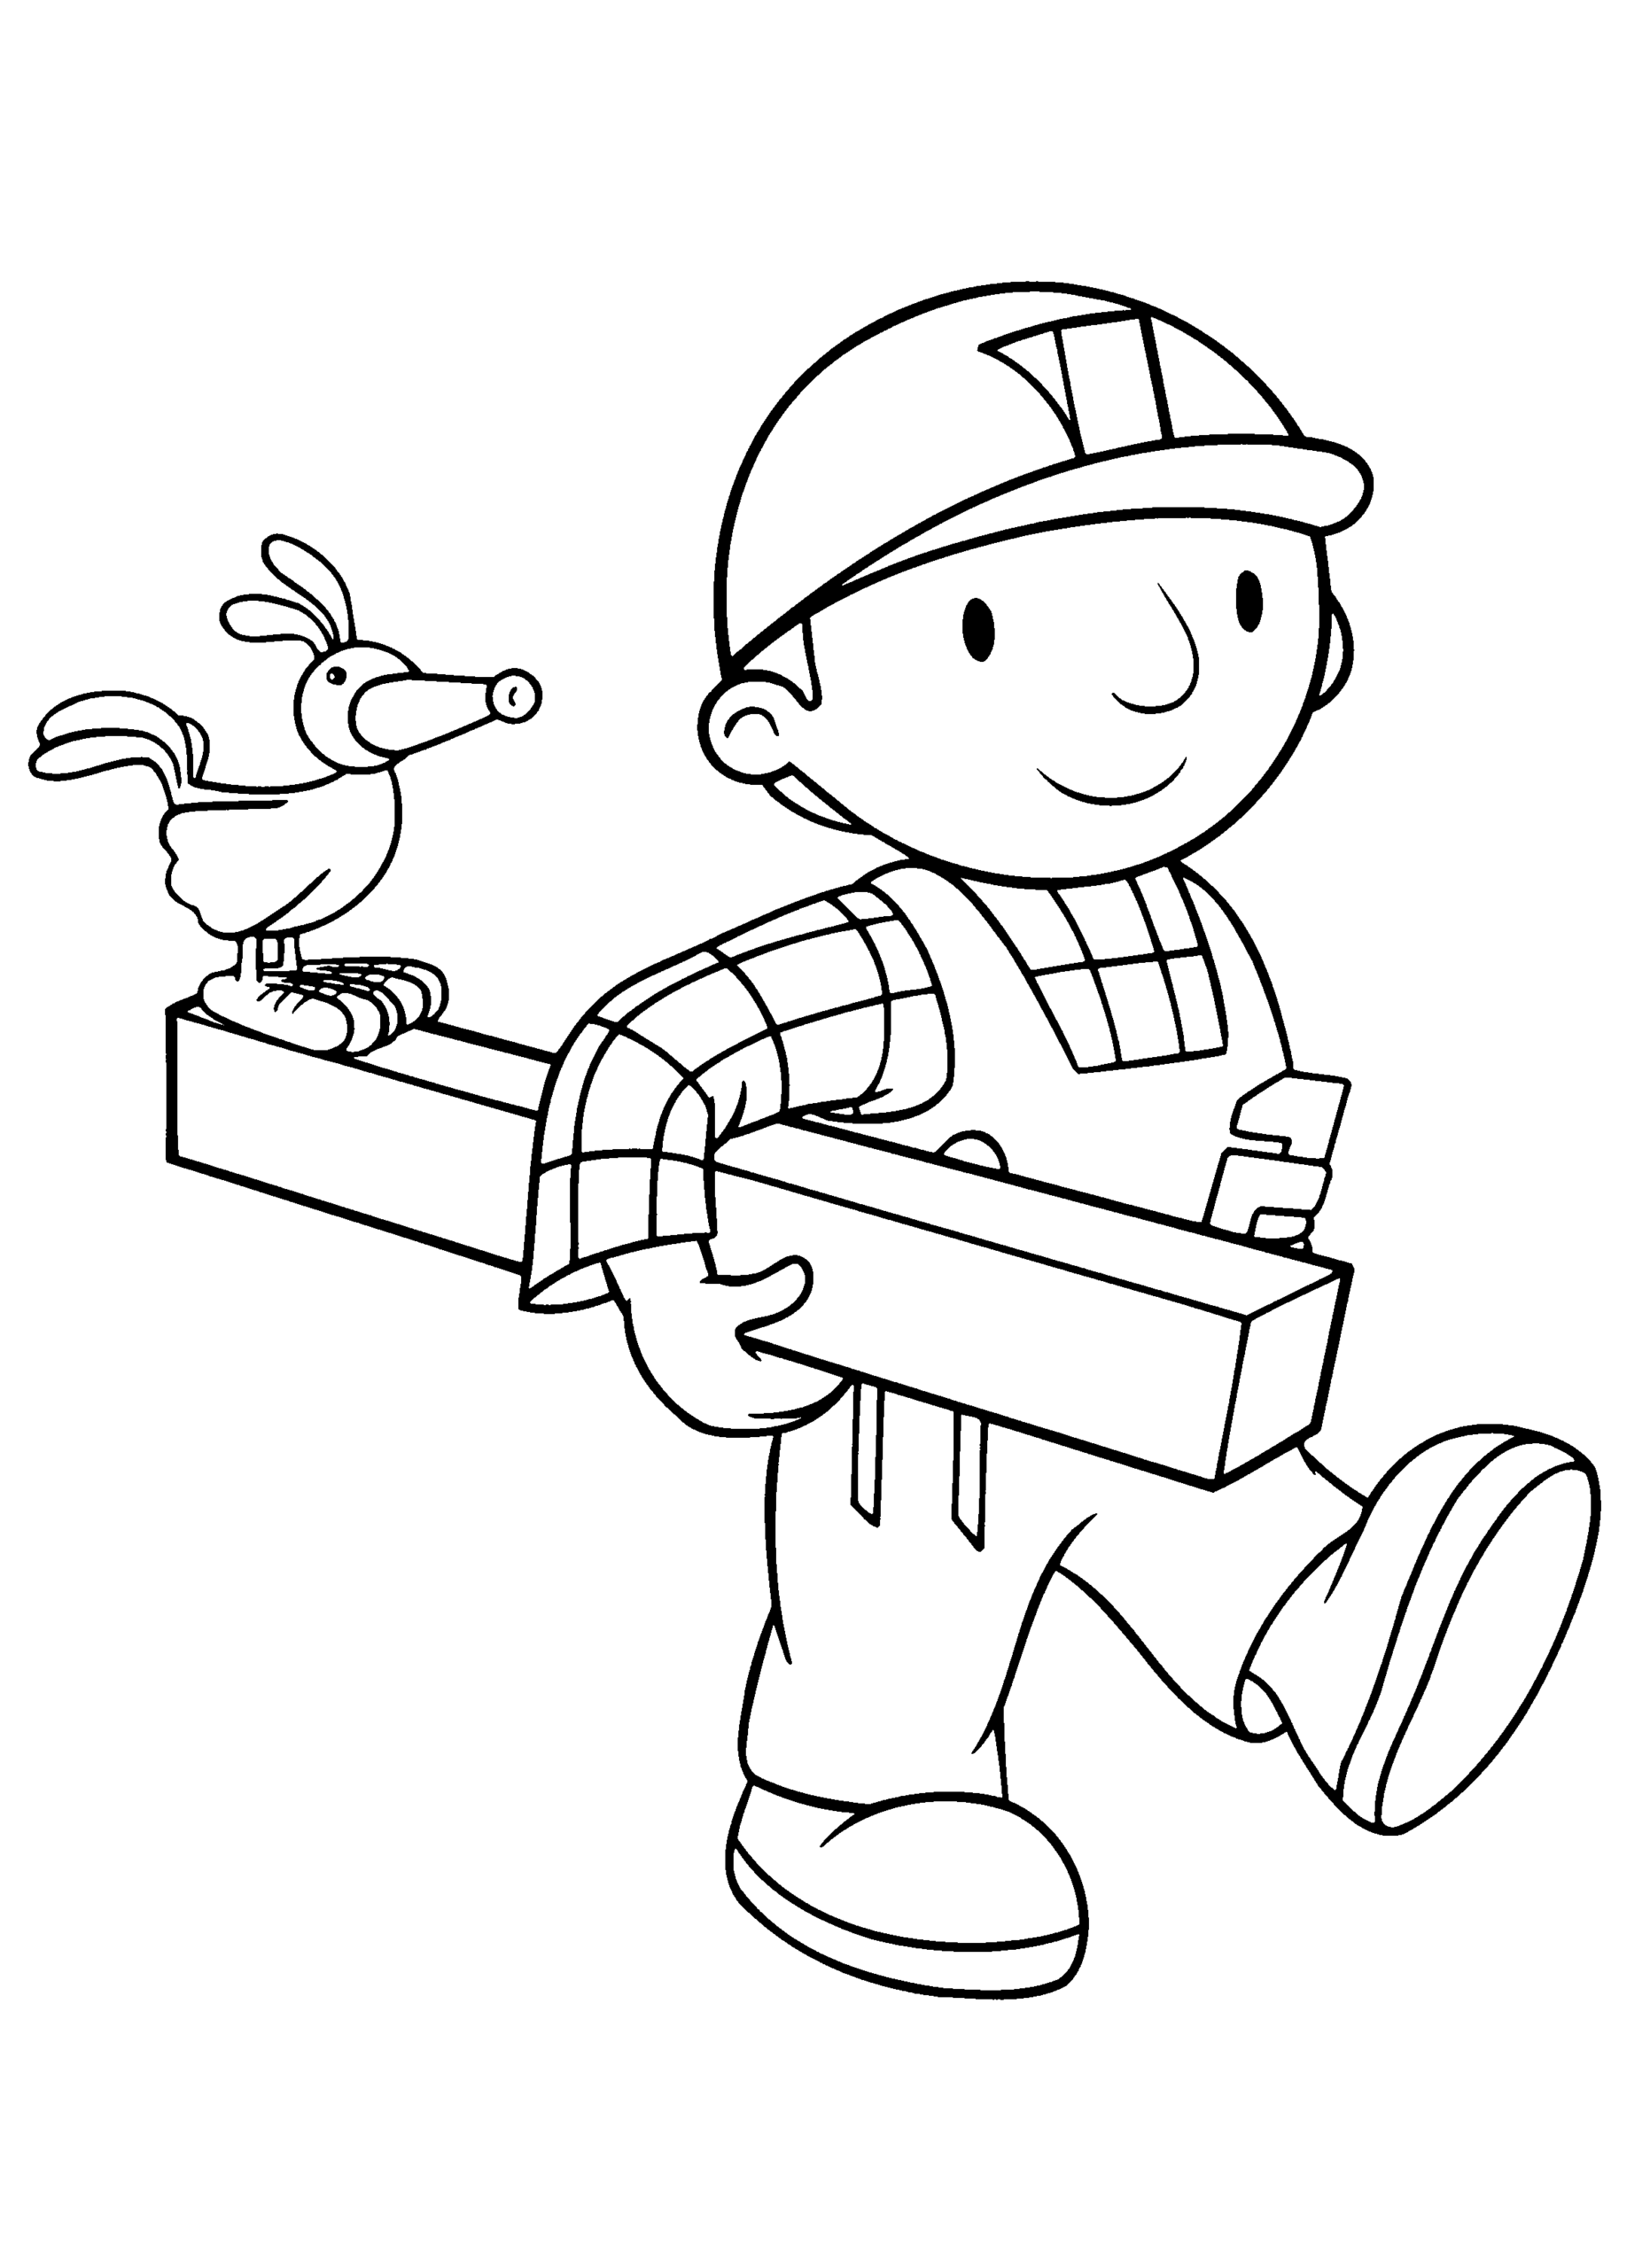 Bob the Builder Coloring Pages TV Film bob the builder 15 Printable 2020 01025 Coloring4free